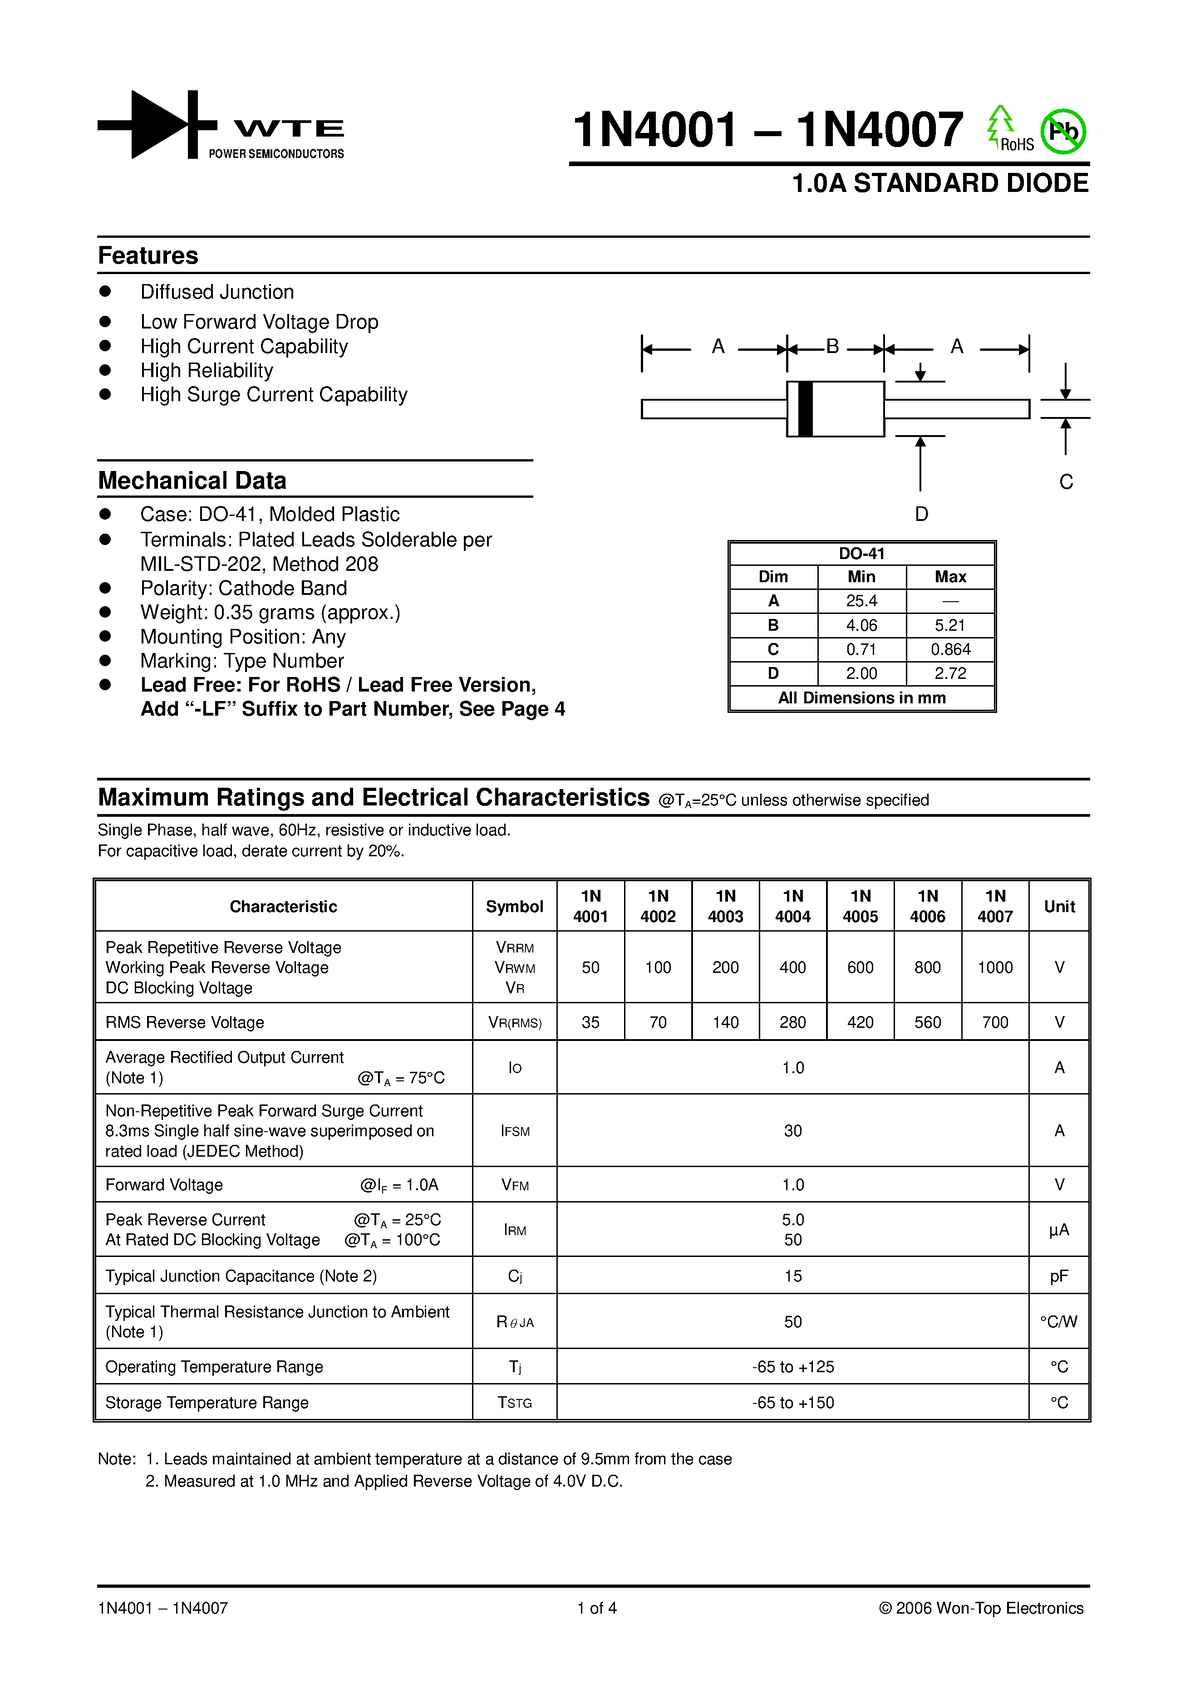 Datasheet 1n4001 1n4007 Pb 1 Standard Diode Features Diffused